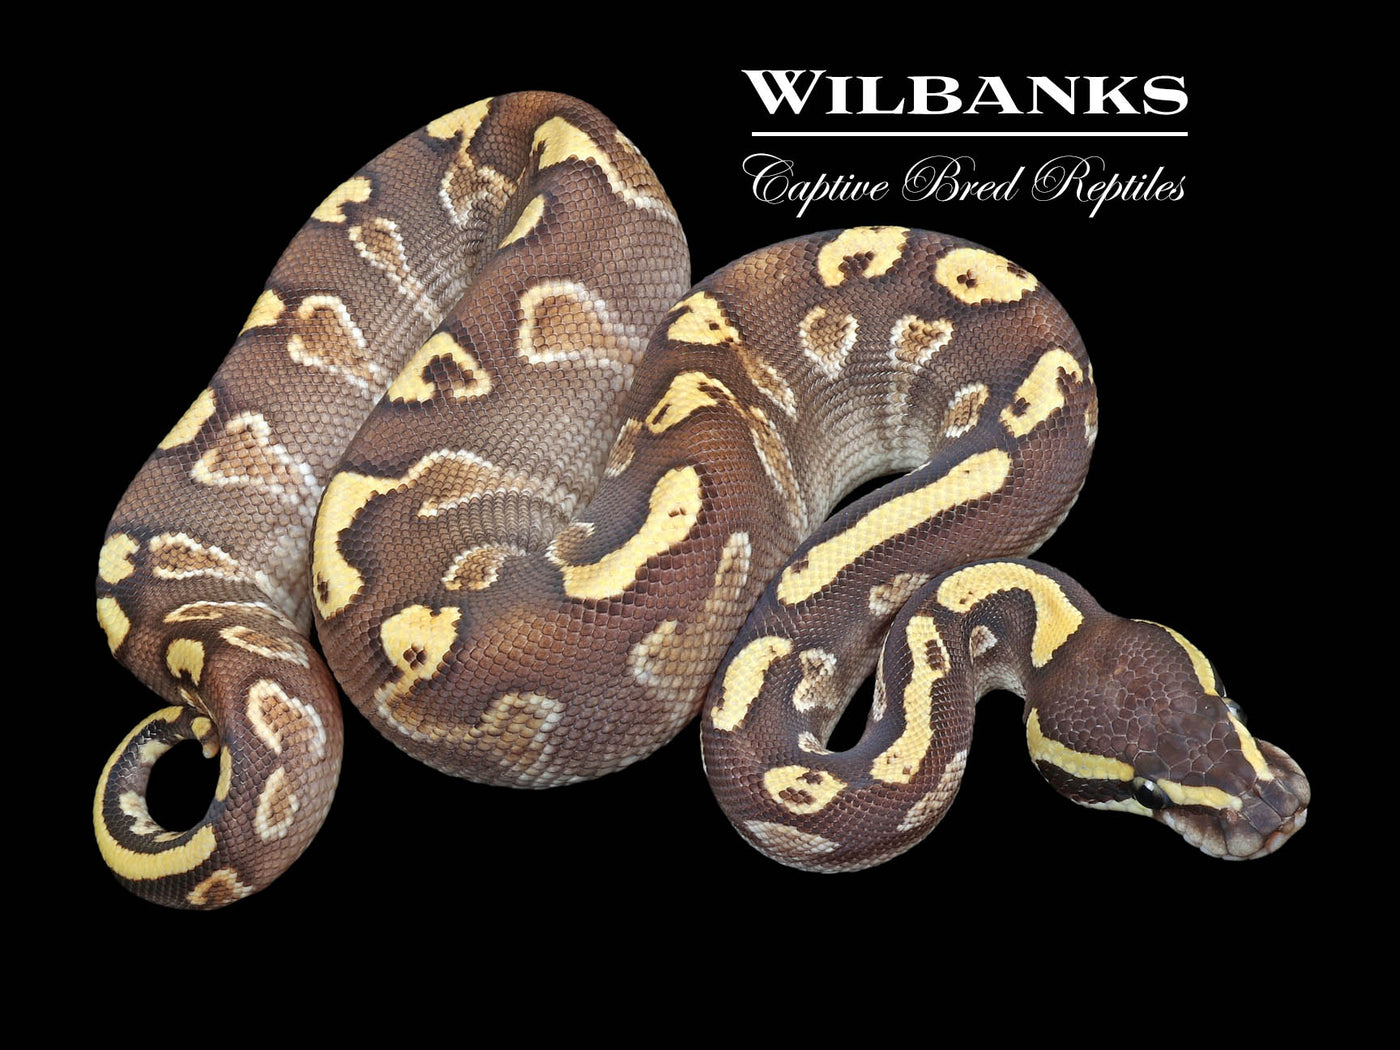 Mojave GHI Yellow Belly Ball Python ♀ '23